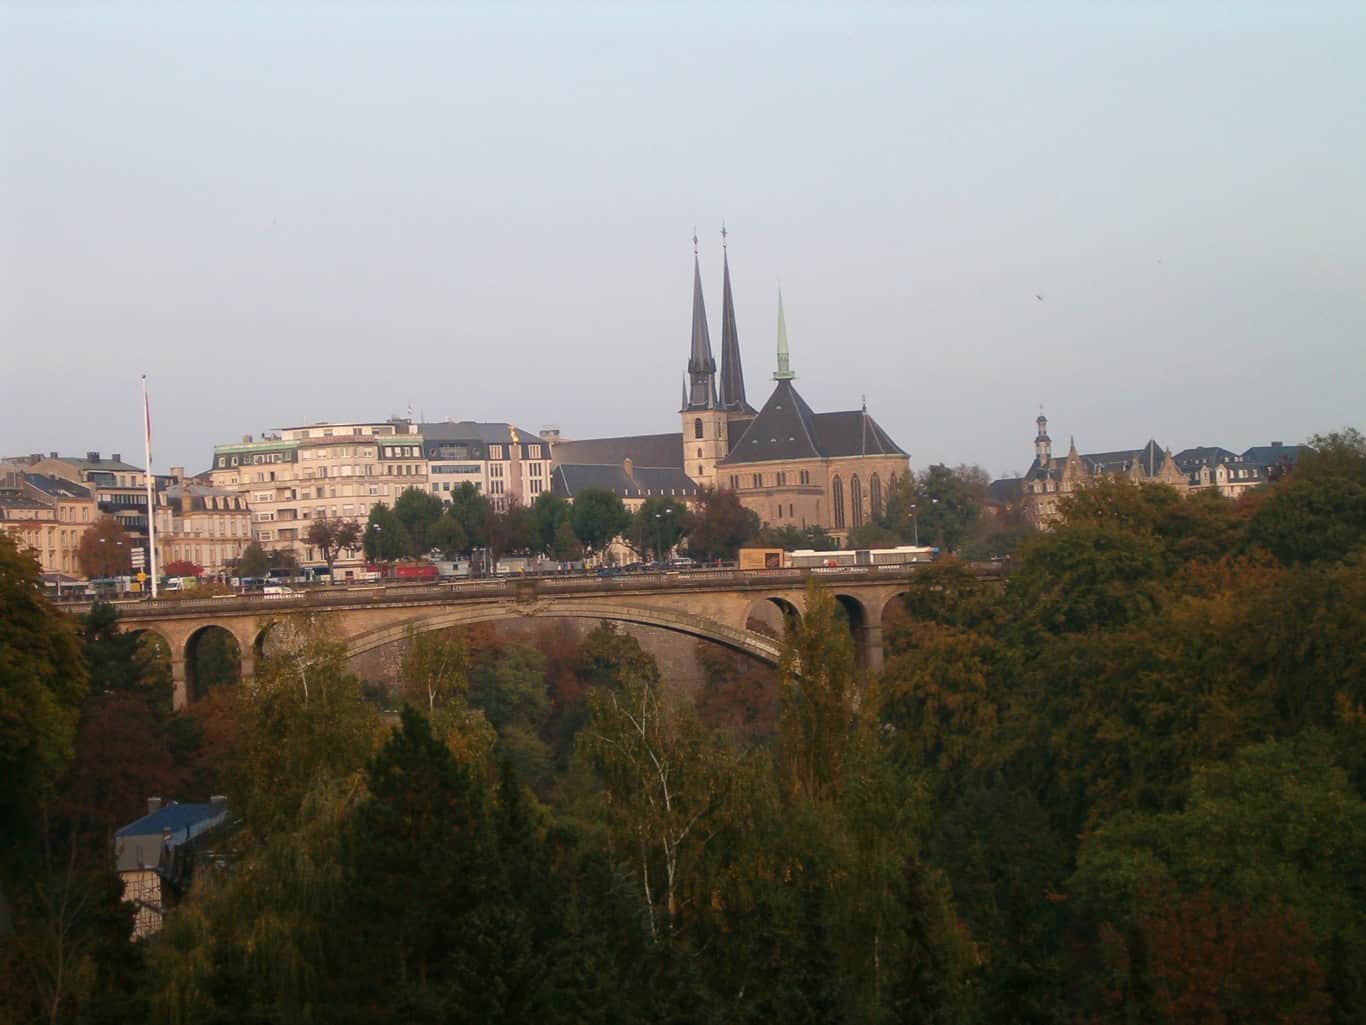 Luxembourg by Jean-Etienne Minh-Duy Poirrier